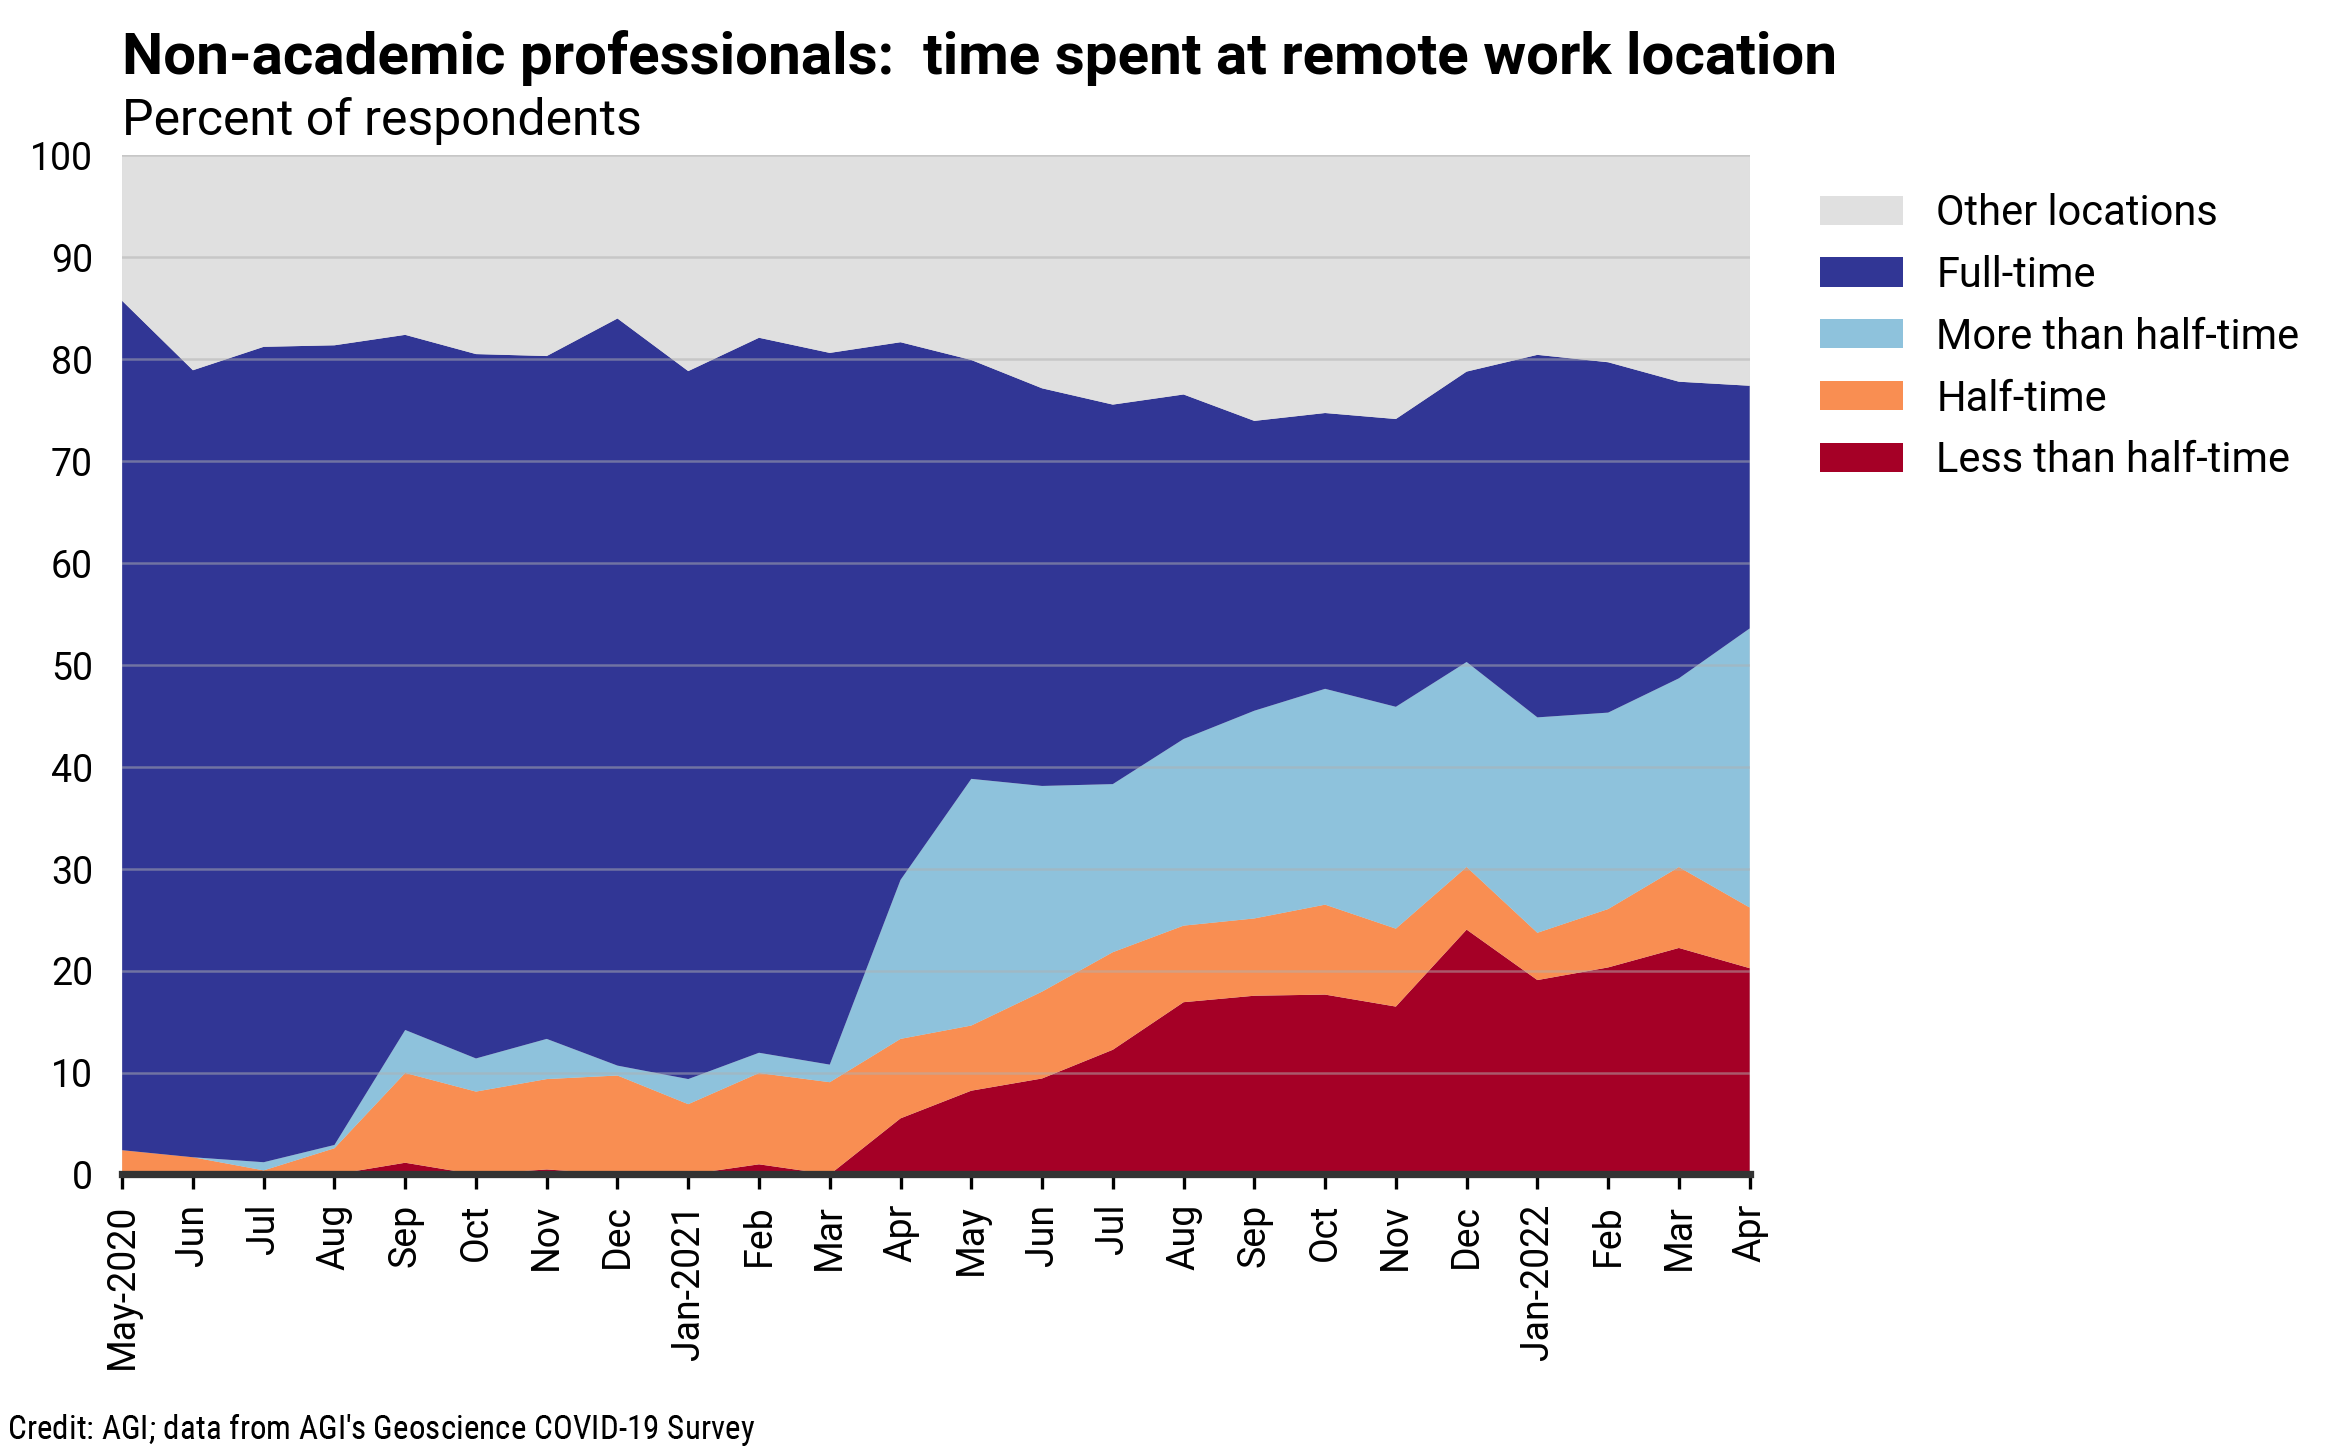 DB_2022-006 chart 07: Non-academic professionals: time spent at remote work location (Credit: AGI; data from AGI's Geoscience COVID-19 Survey)